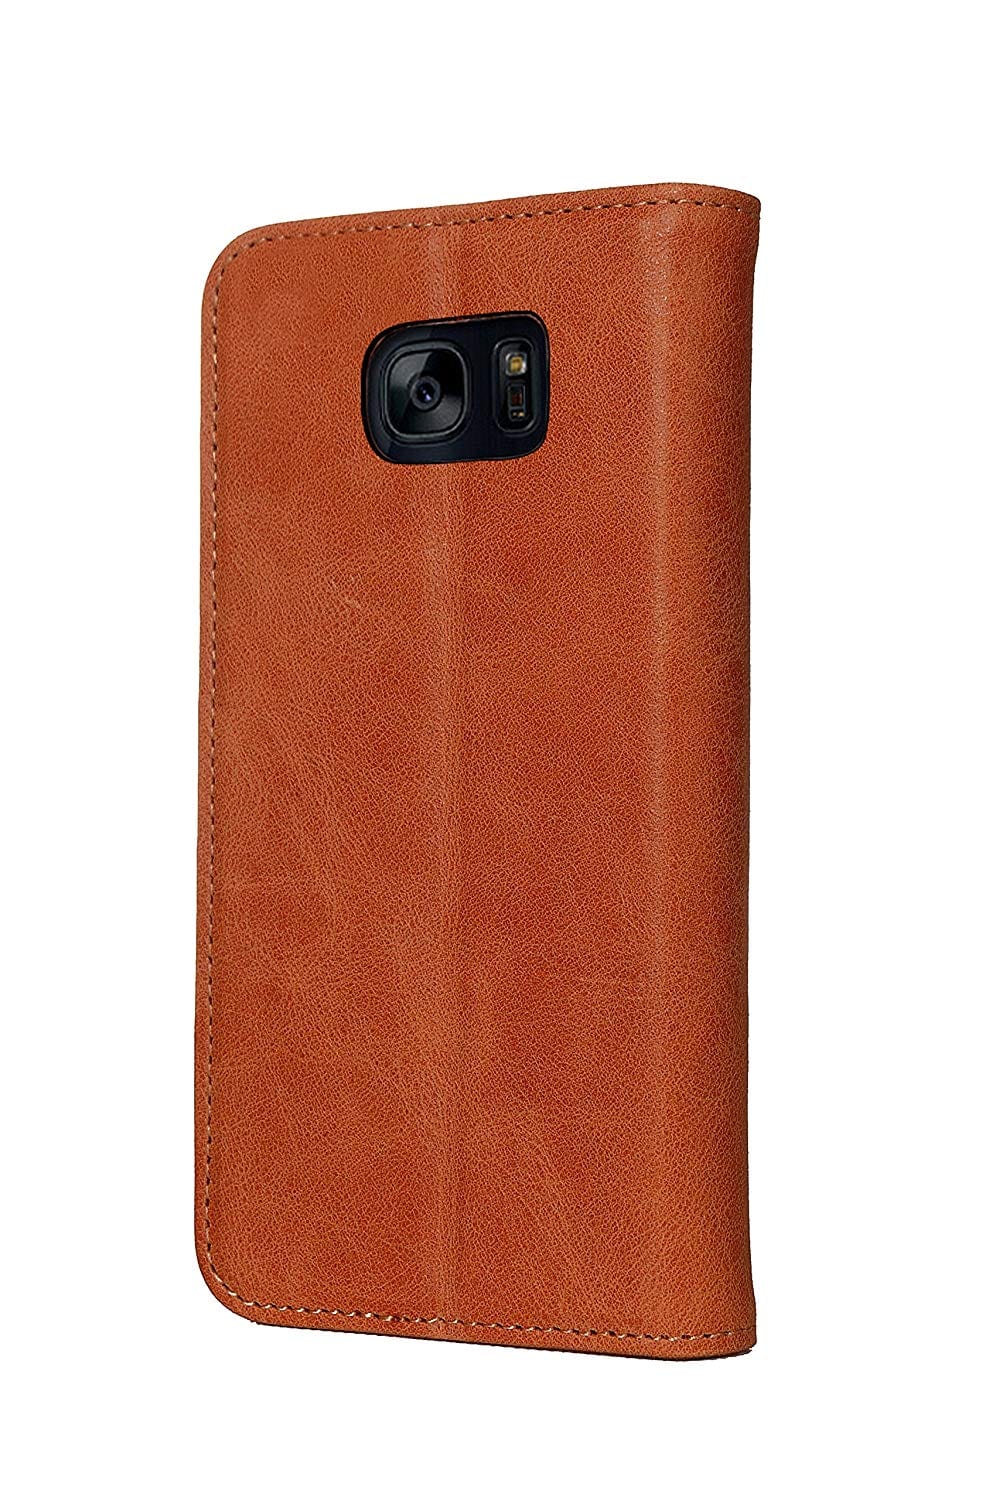 Samsung Galaxy S7 Leather Case. Premium Slim Genuine Leather Stand Case/Cover/Wallet (Tan)